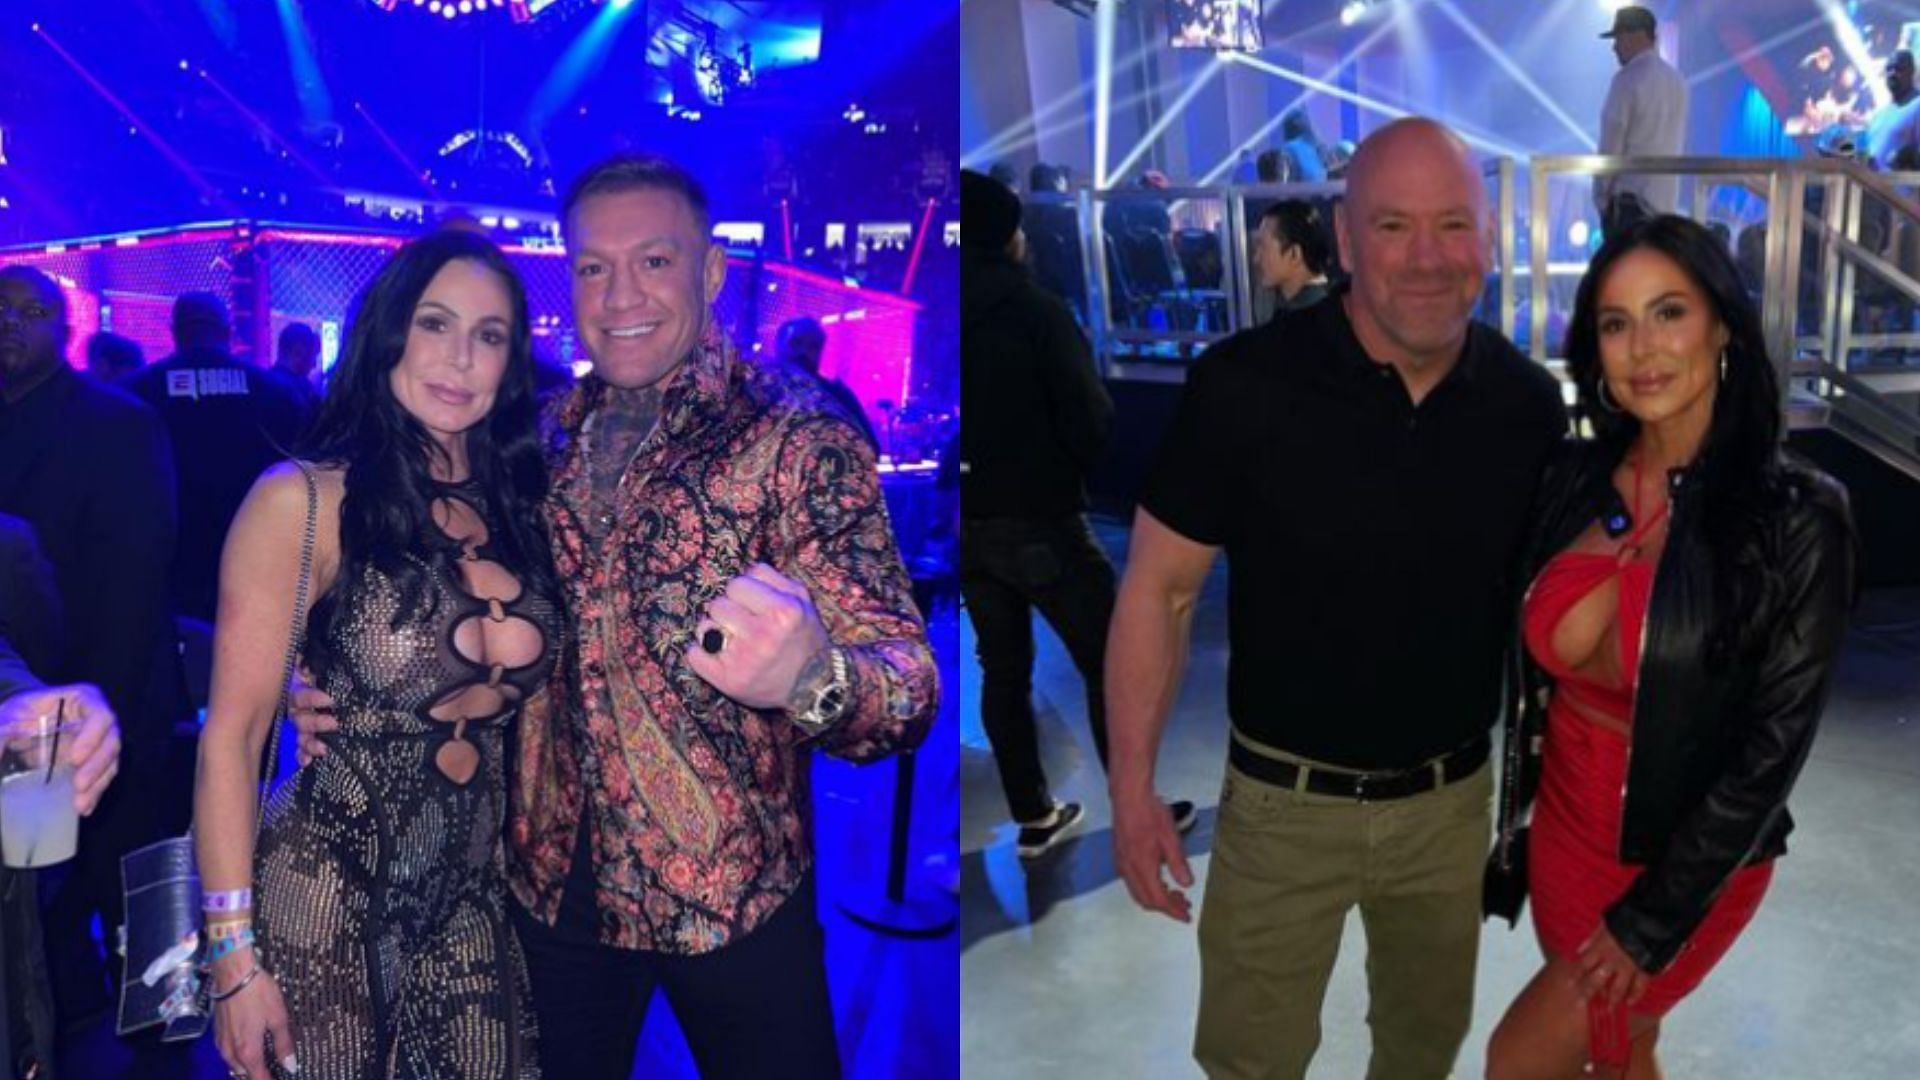 Kendra Lust with Conor McGregor (left) &amp; Dana White (right) [Images courtesy of @kendralust on Instagram]